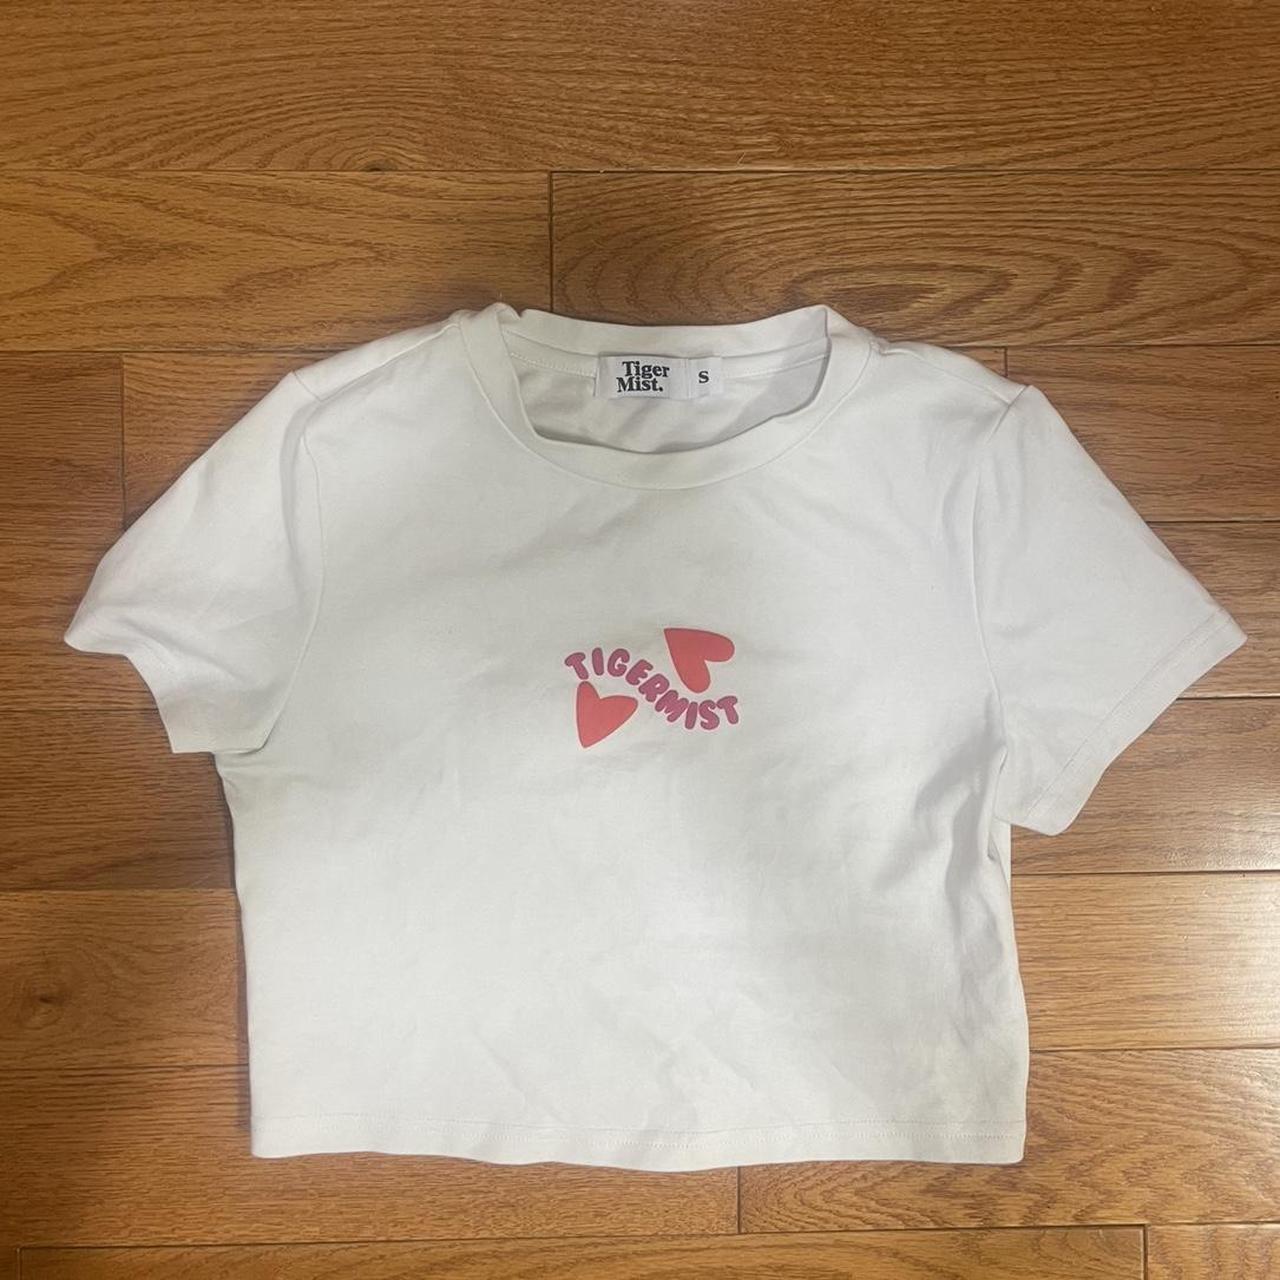 Tiger Mist Women's White and Red T-shirt | Depop